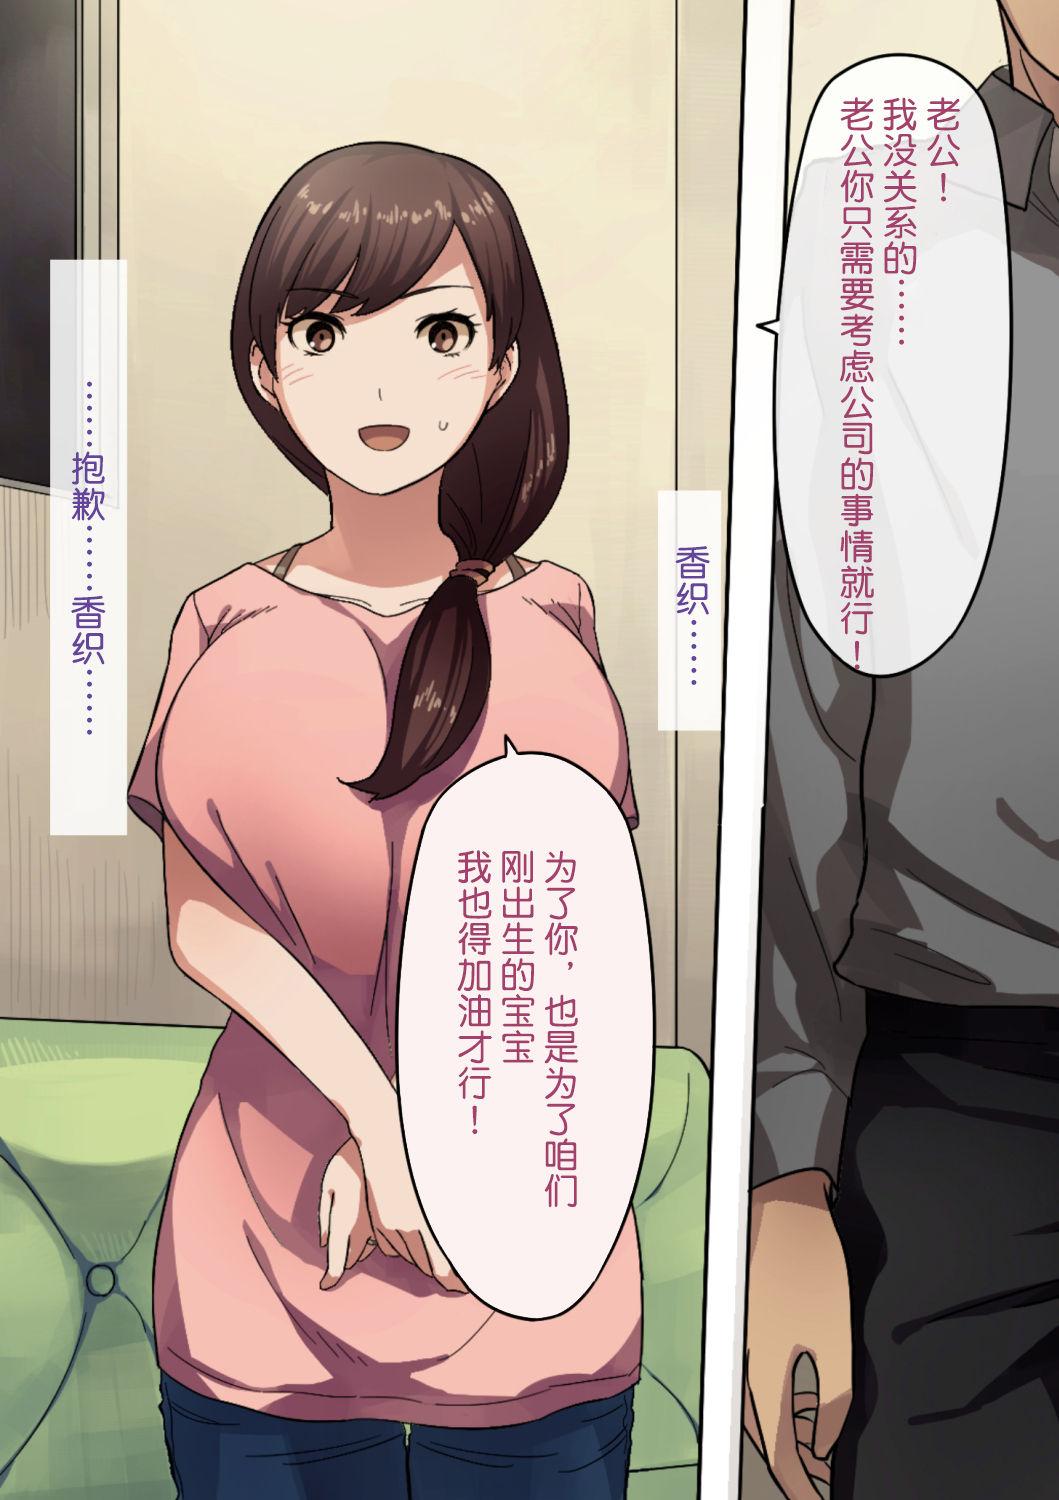 Sex Toys [NT Labo] Aisai, Doui no Ue, Netorare | Beloved Wife - Netorare After Consent[Chinese]【不可视汉化】 Ex Girlfriend - Page 5